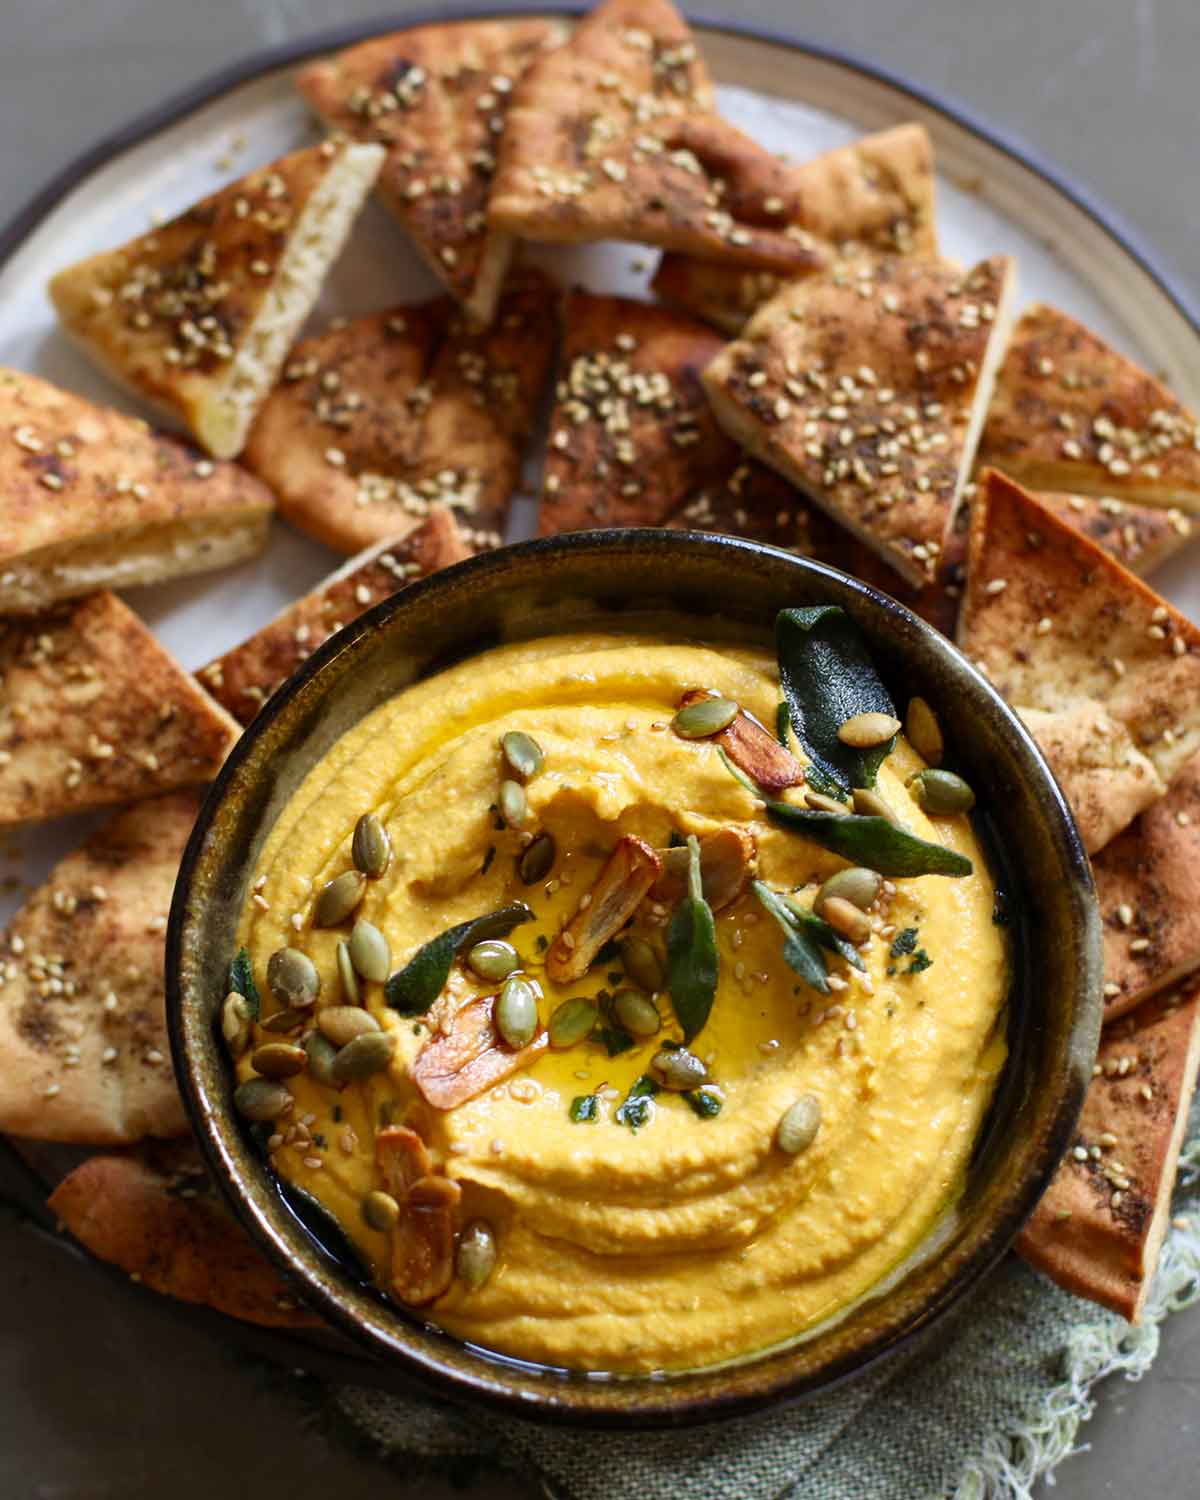 Pumpkin hummus in a bowl, on a plate with small pieces of bread.